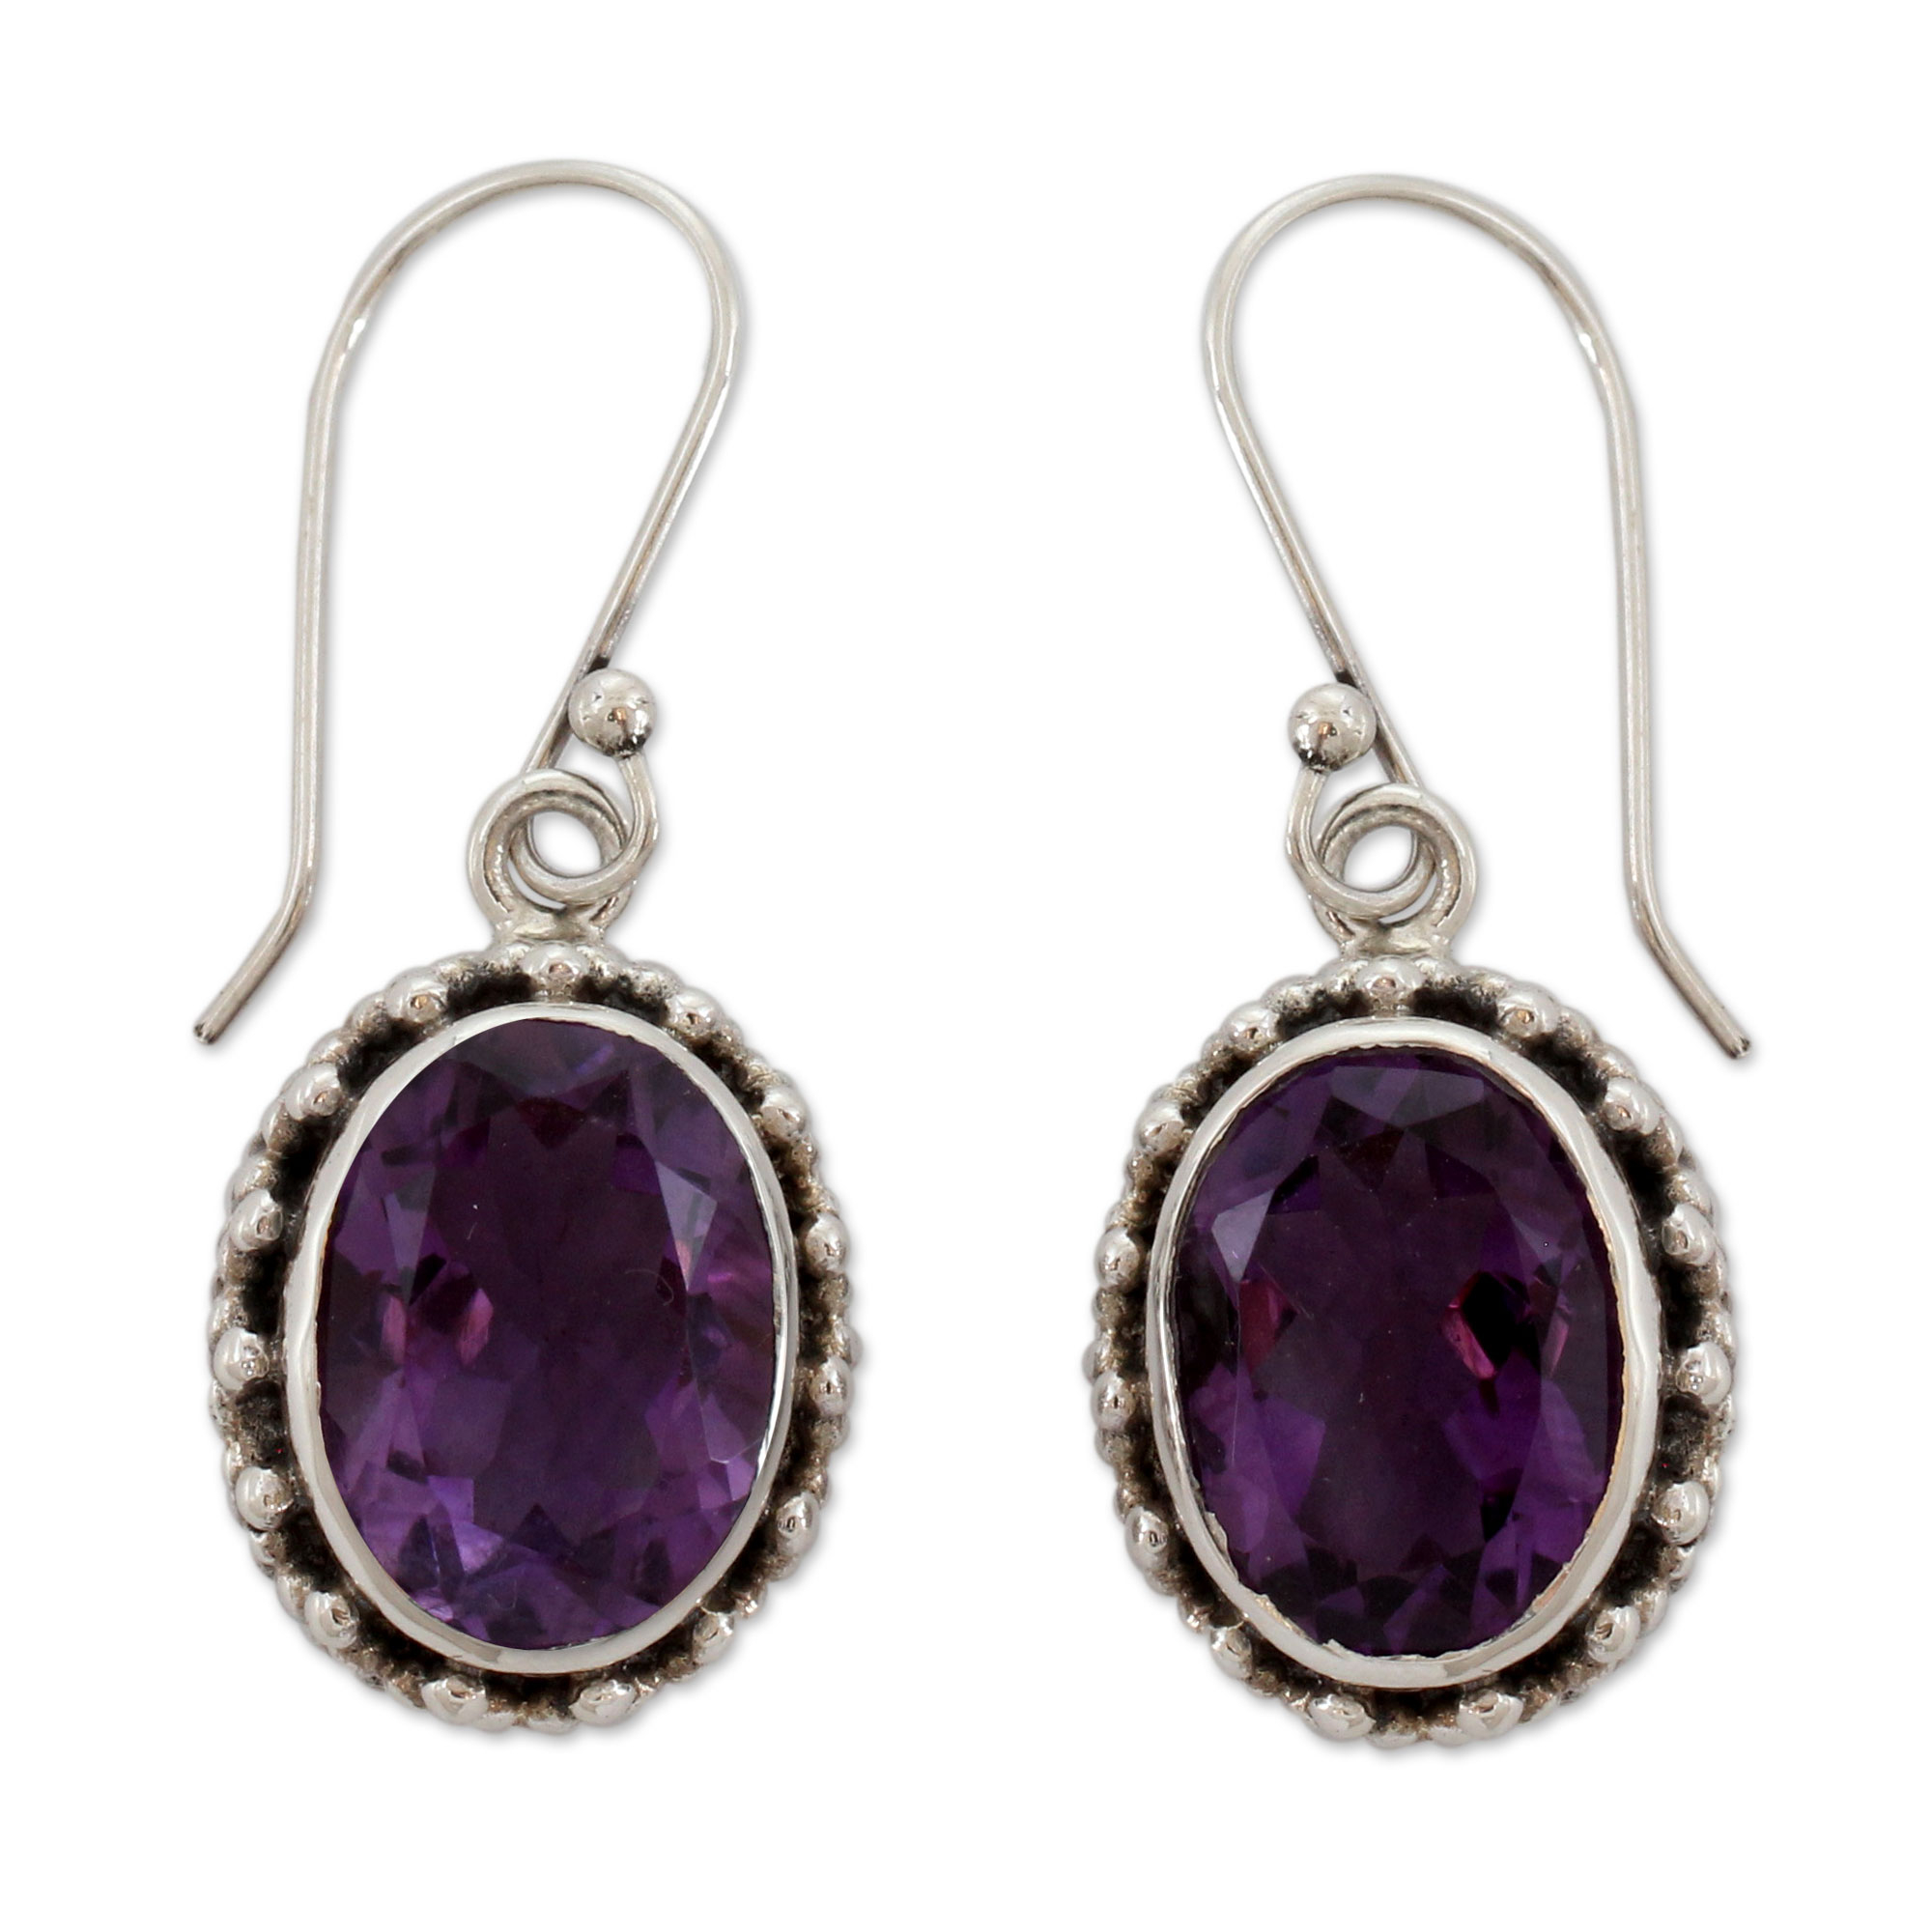 UNICEF Market | Handmade Sterling Silver and Amethyst Earrings from ...